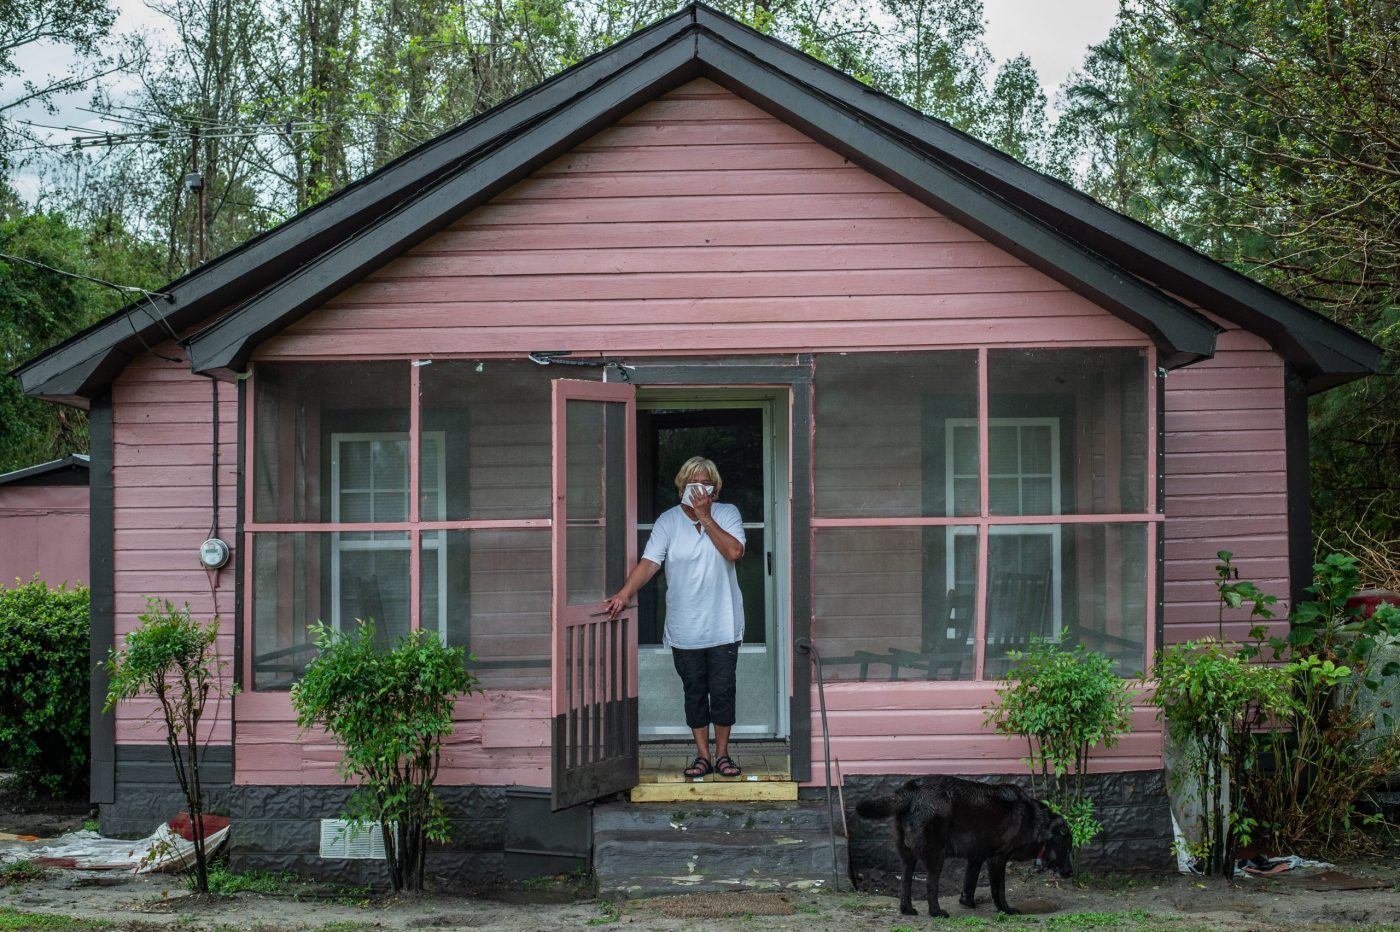 Activist Elsie Herring, stands on the porch of her family home, holding a handkerchief over her mouth to filter out manure being sprayed on the field next door / Photo Credit: Jo-Anne McArthur / We Animals